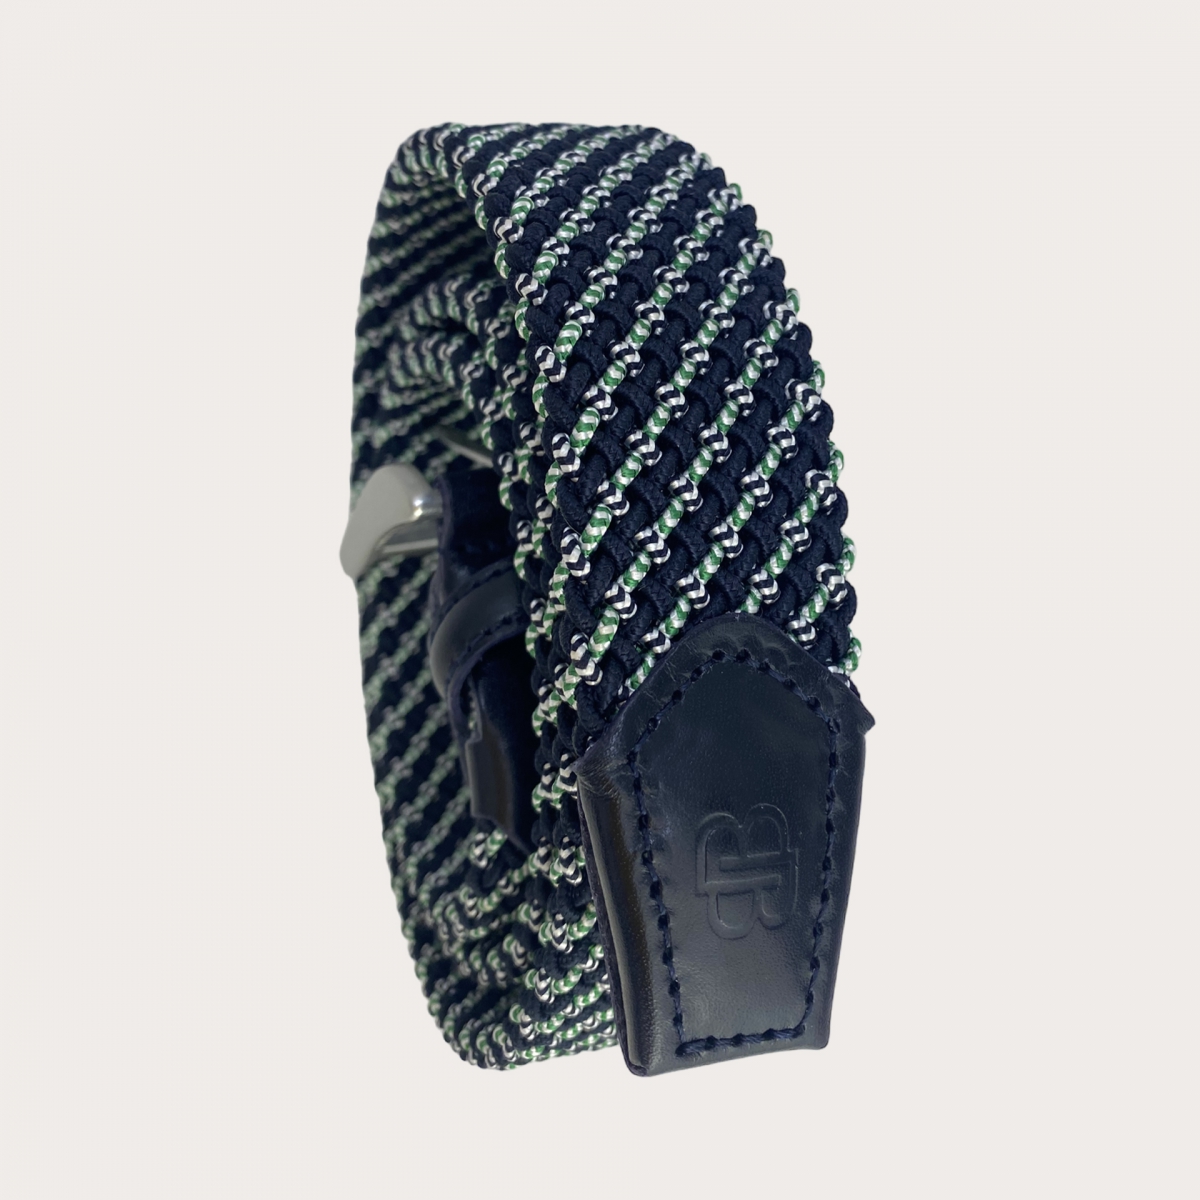 BRUCLE Braided elastic belt in blue with white and green oblique micro stripes